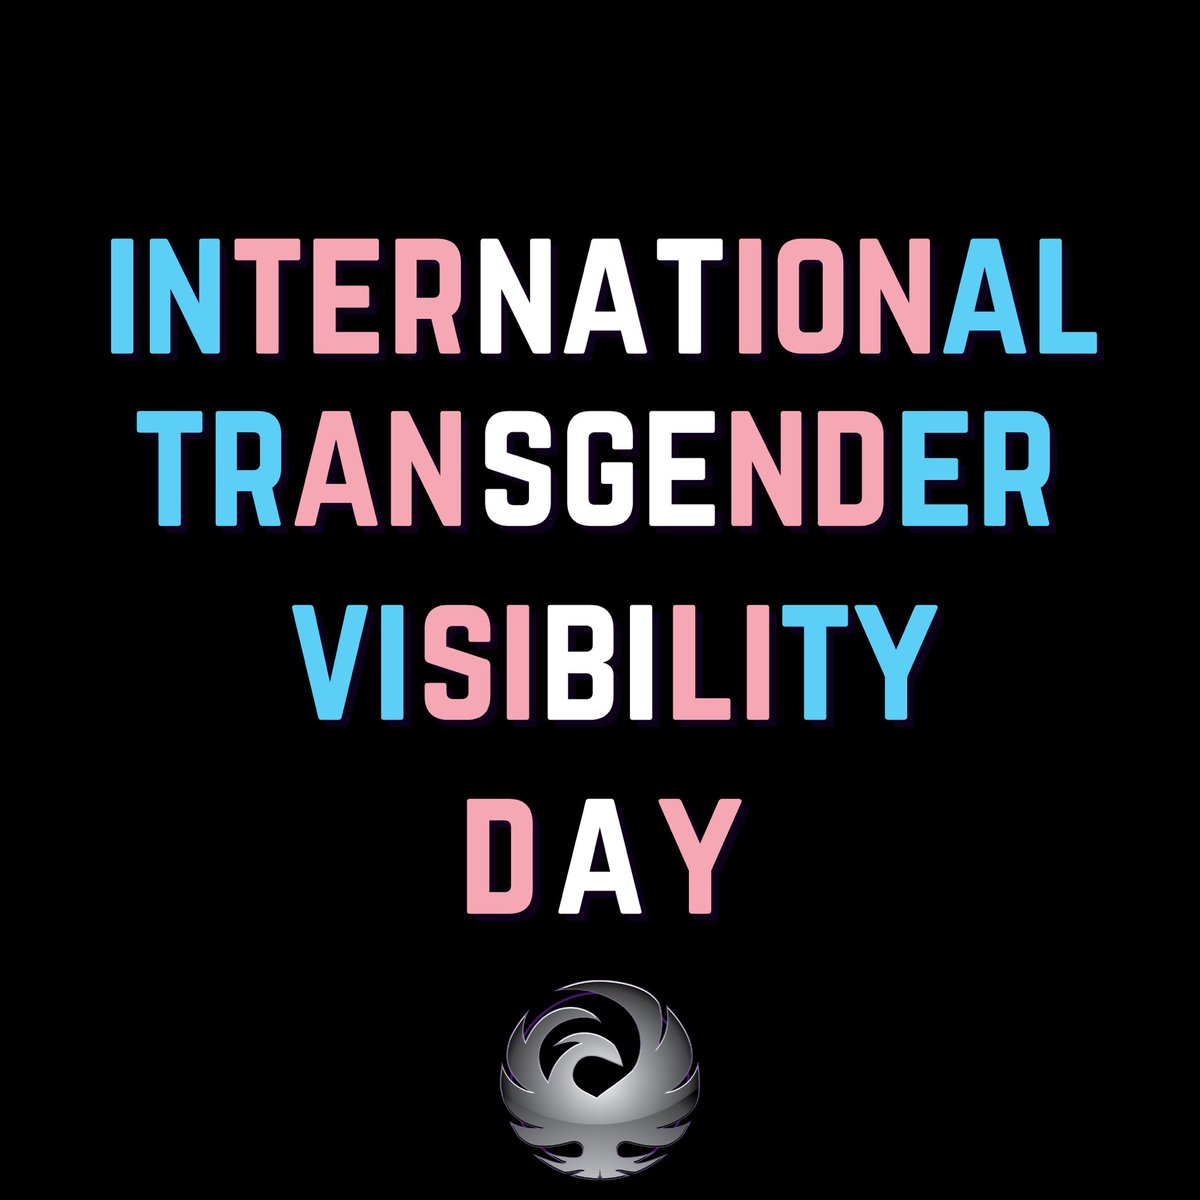 Yesterday was #TransDayOfVisibility We stand with and support the trans community. As we strive for equality, we encourage others to educate themselves and consider making a donation to organizations that provide aid and resources to the trans community.